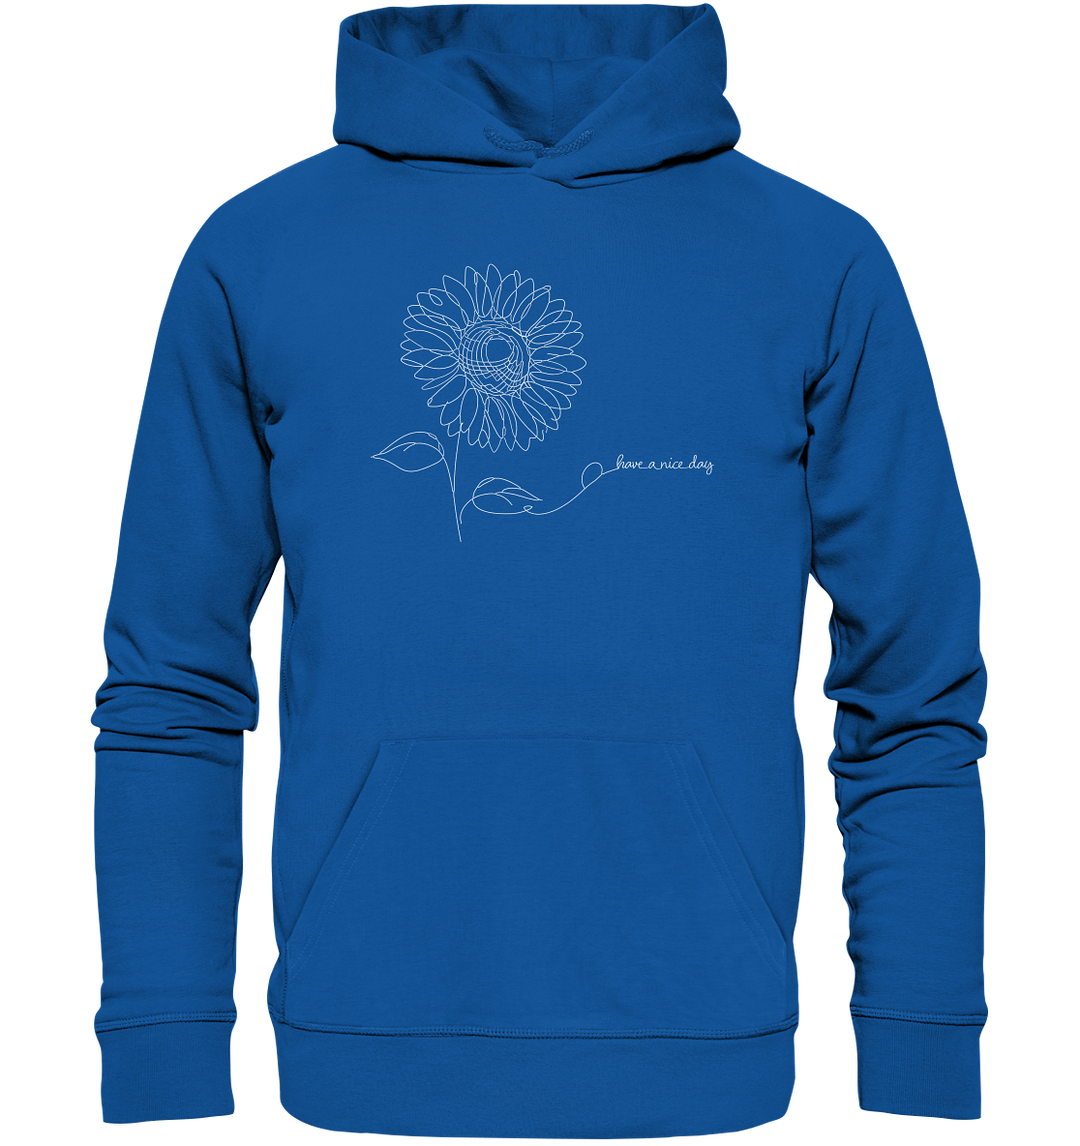 HAVE A NICE DAY - Bio Hoodie Unisex